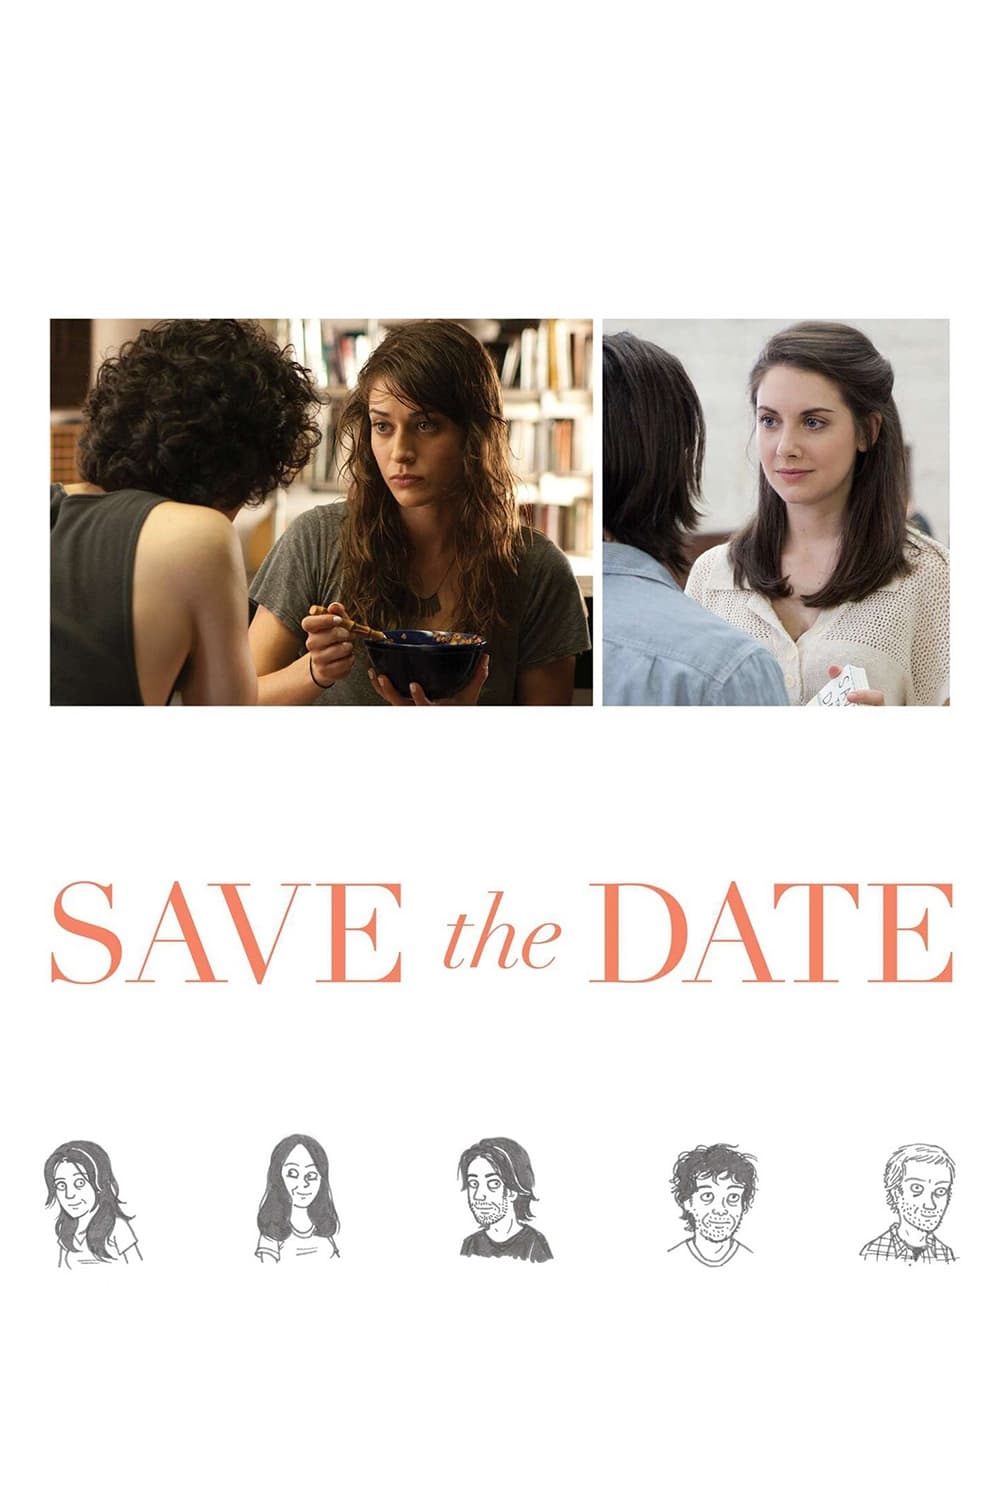 Save the Date (2012)